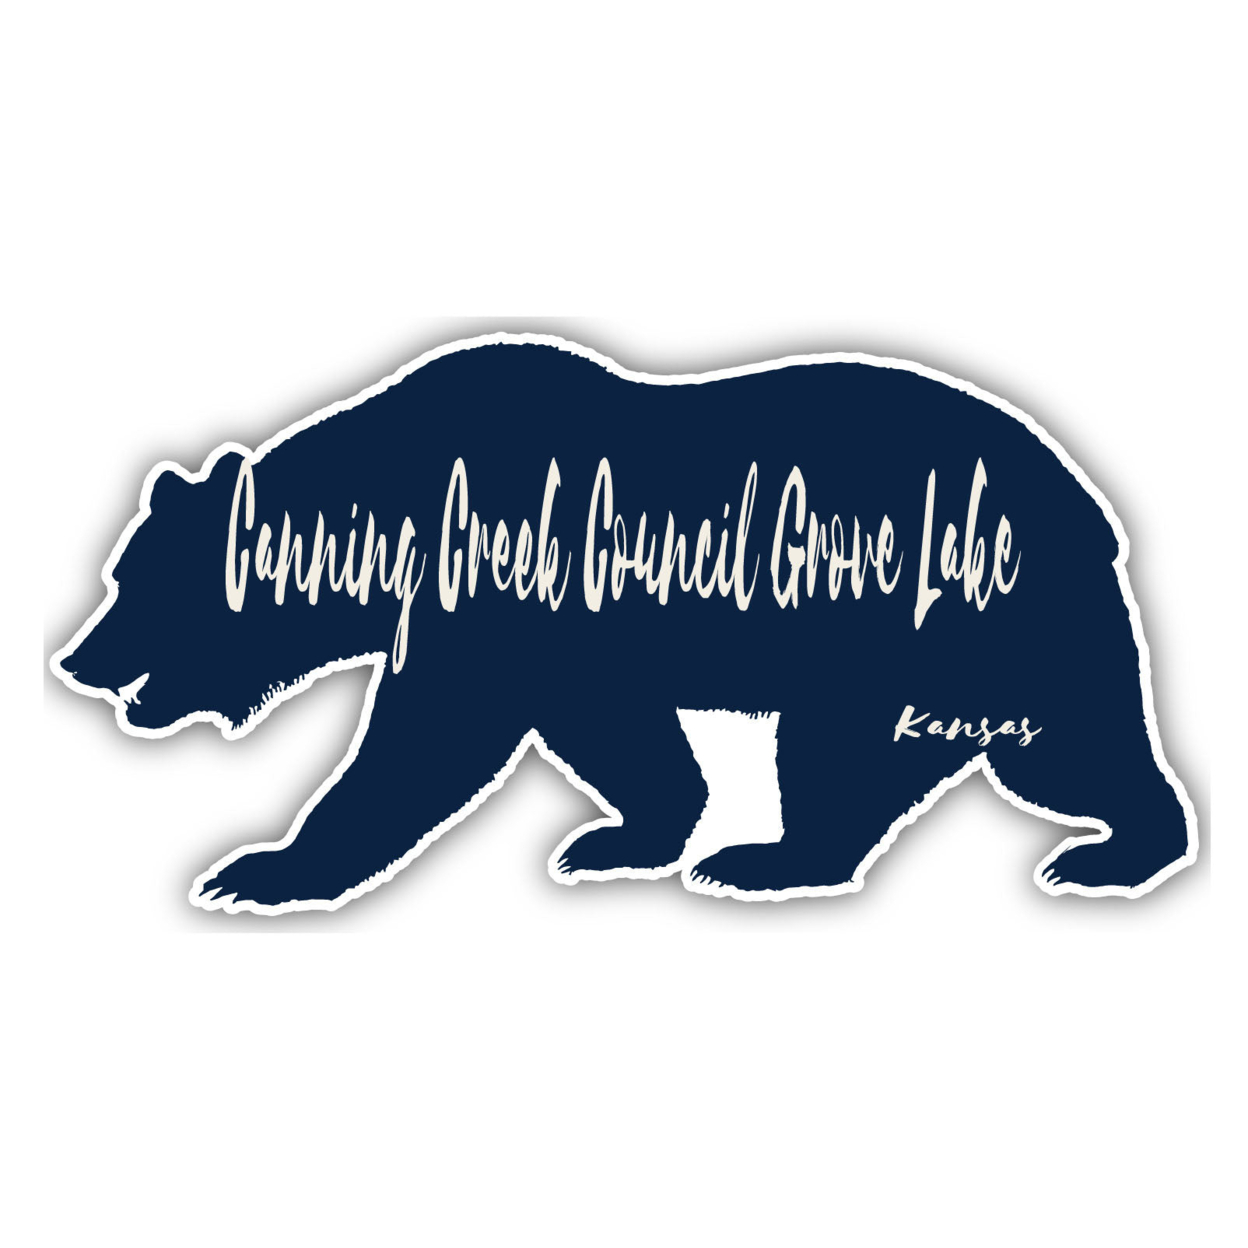 Canning Creek Council Grove Lake Kansas Souvenir Decorative Stickers (Choose Theme And Size) - 4-Pack, 2-Inch, Bear